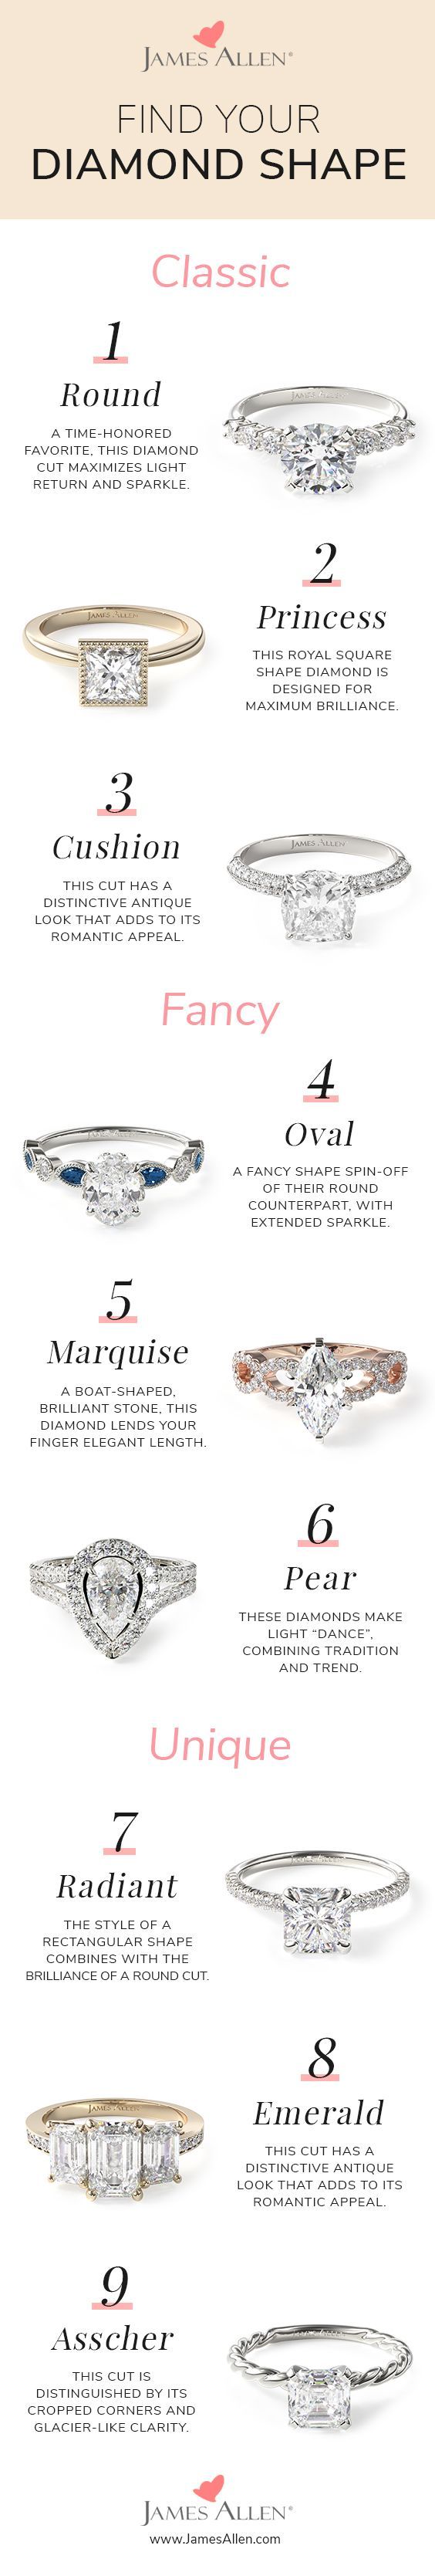 Engagement Rings 101 As Seen On Pinterest Shop Engagement Rings